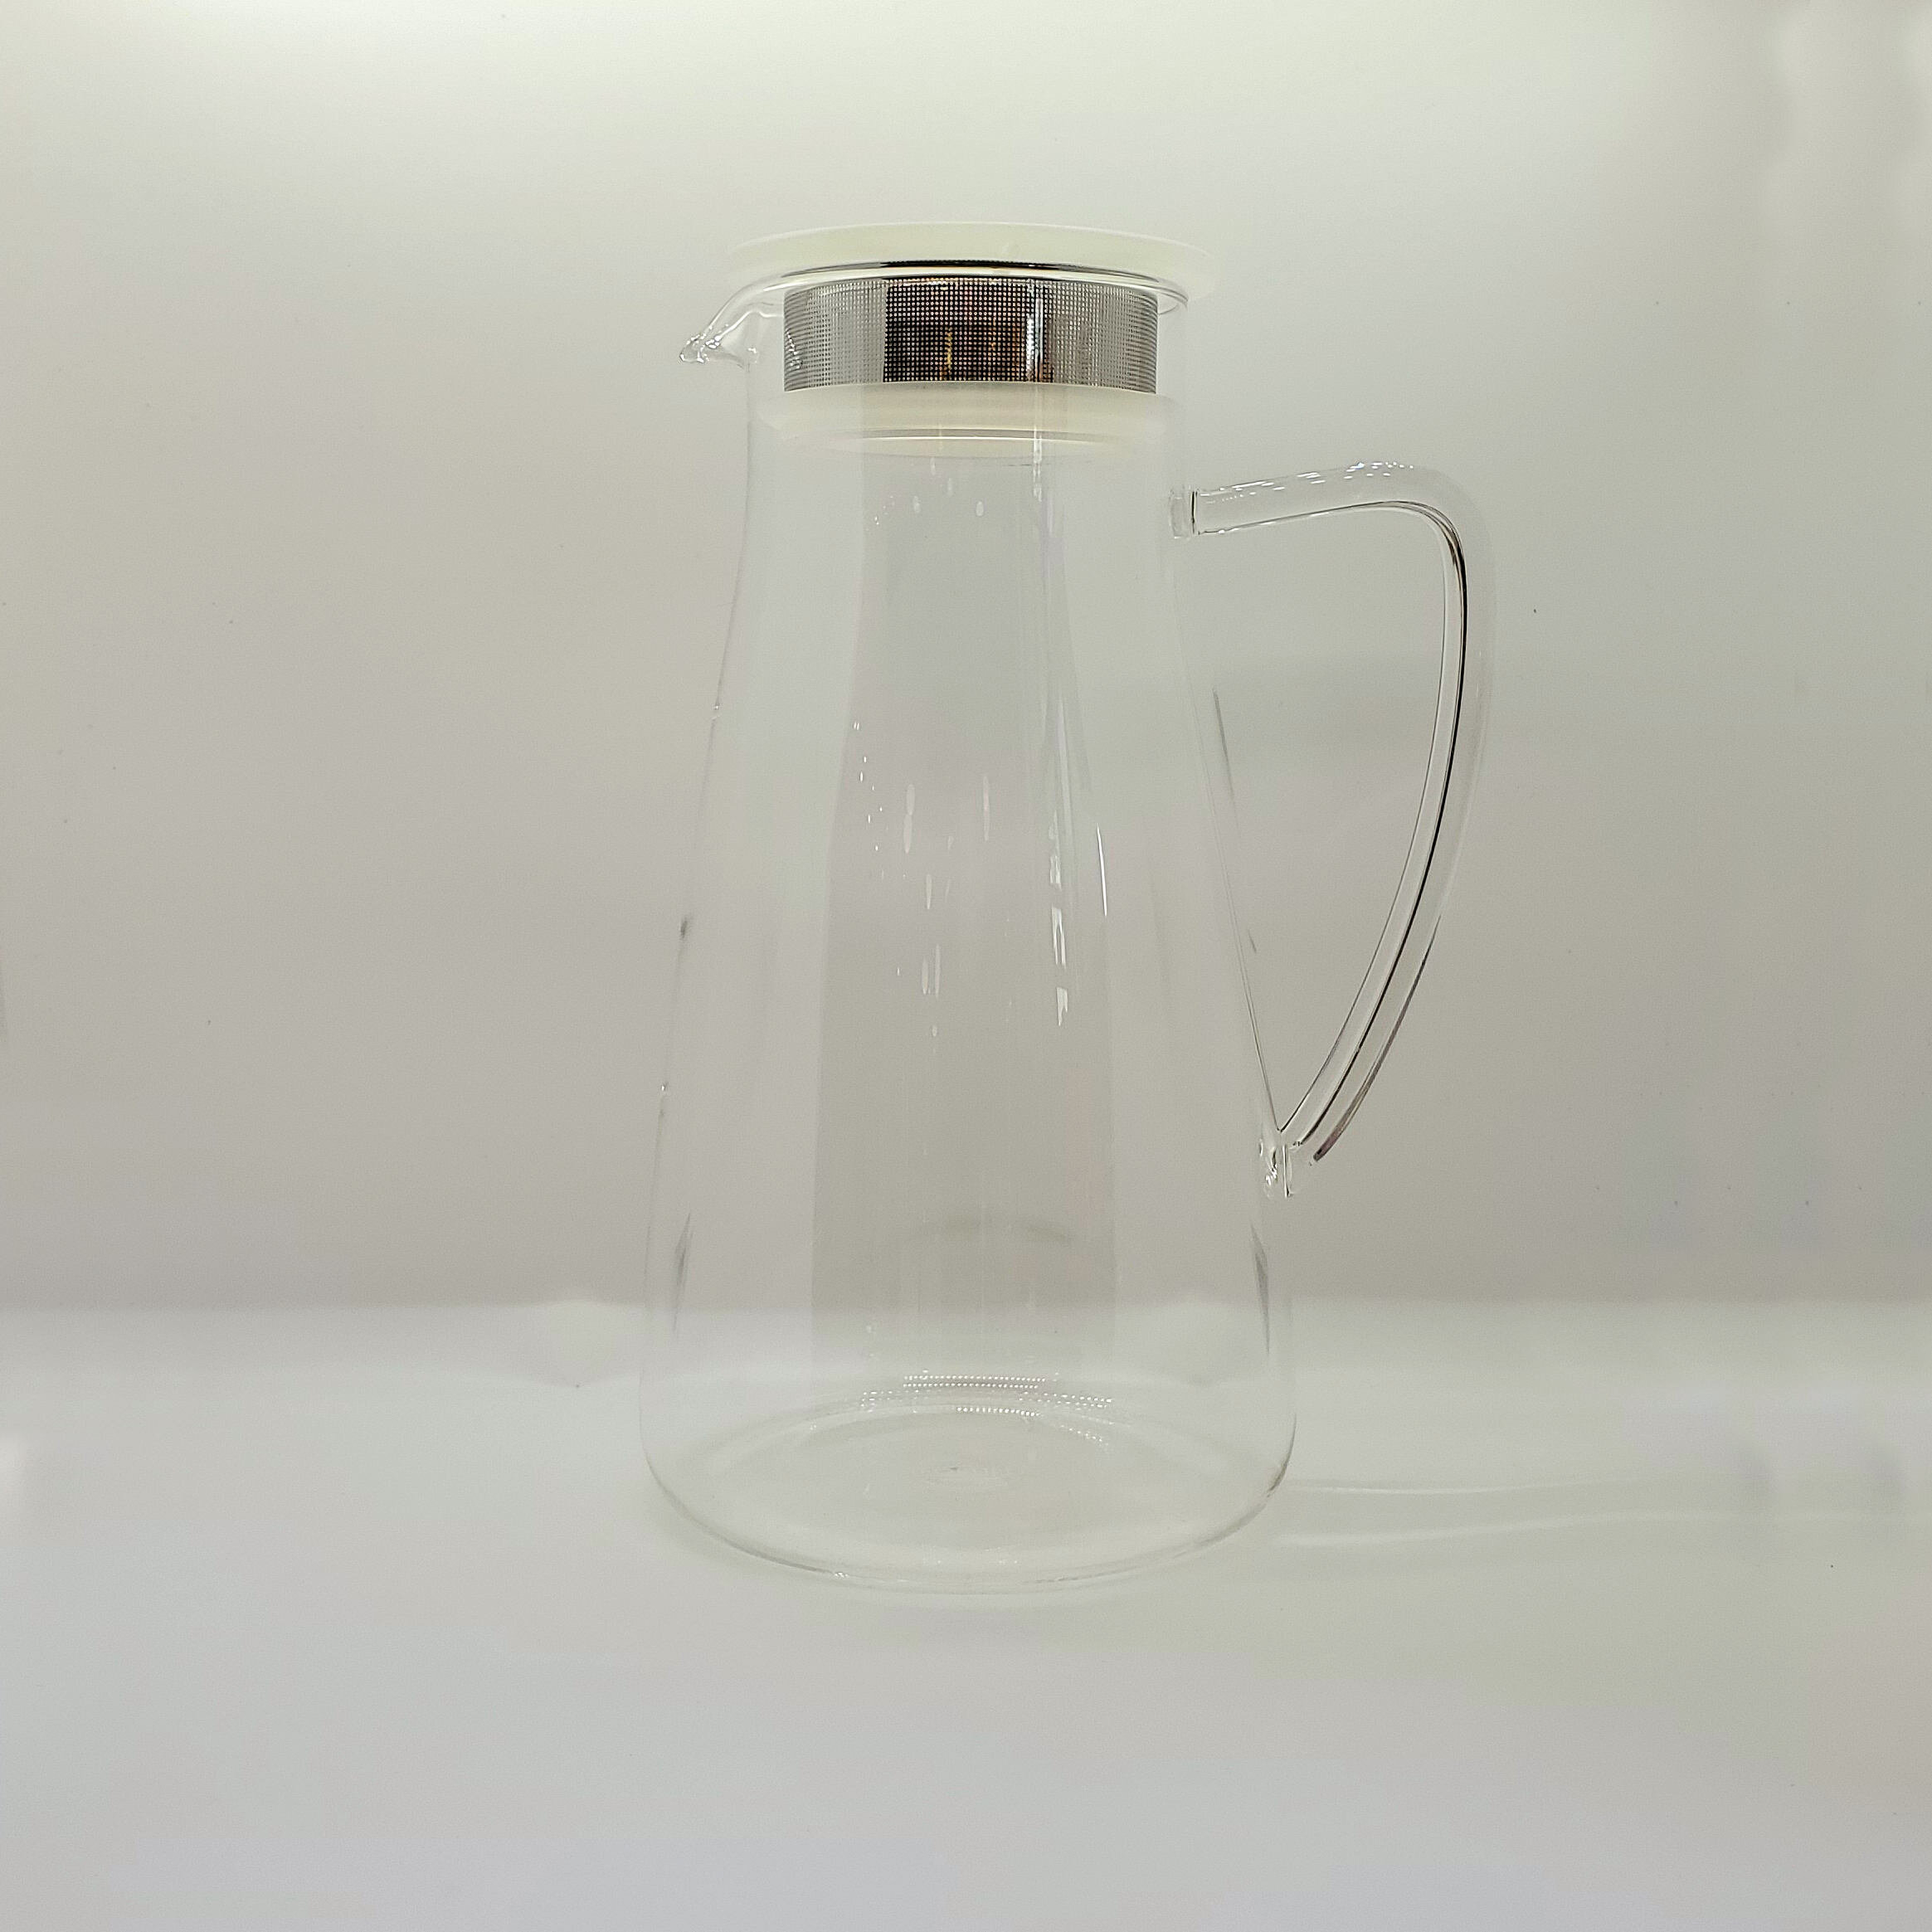 https://images.squarespace-cdn.com/content/v1/5a077c3aa9db09c5a37d31df/1605733640554-XXZQR8ITBGZWYDPOXIV2/coffee-Flask+Tea+Brewer+unboxed.jpg?format=2500w